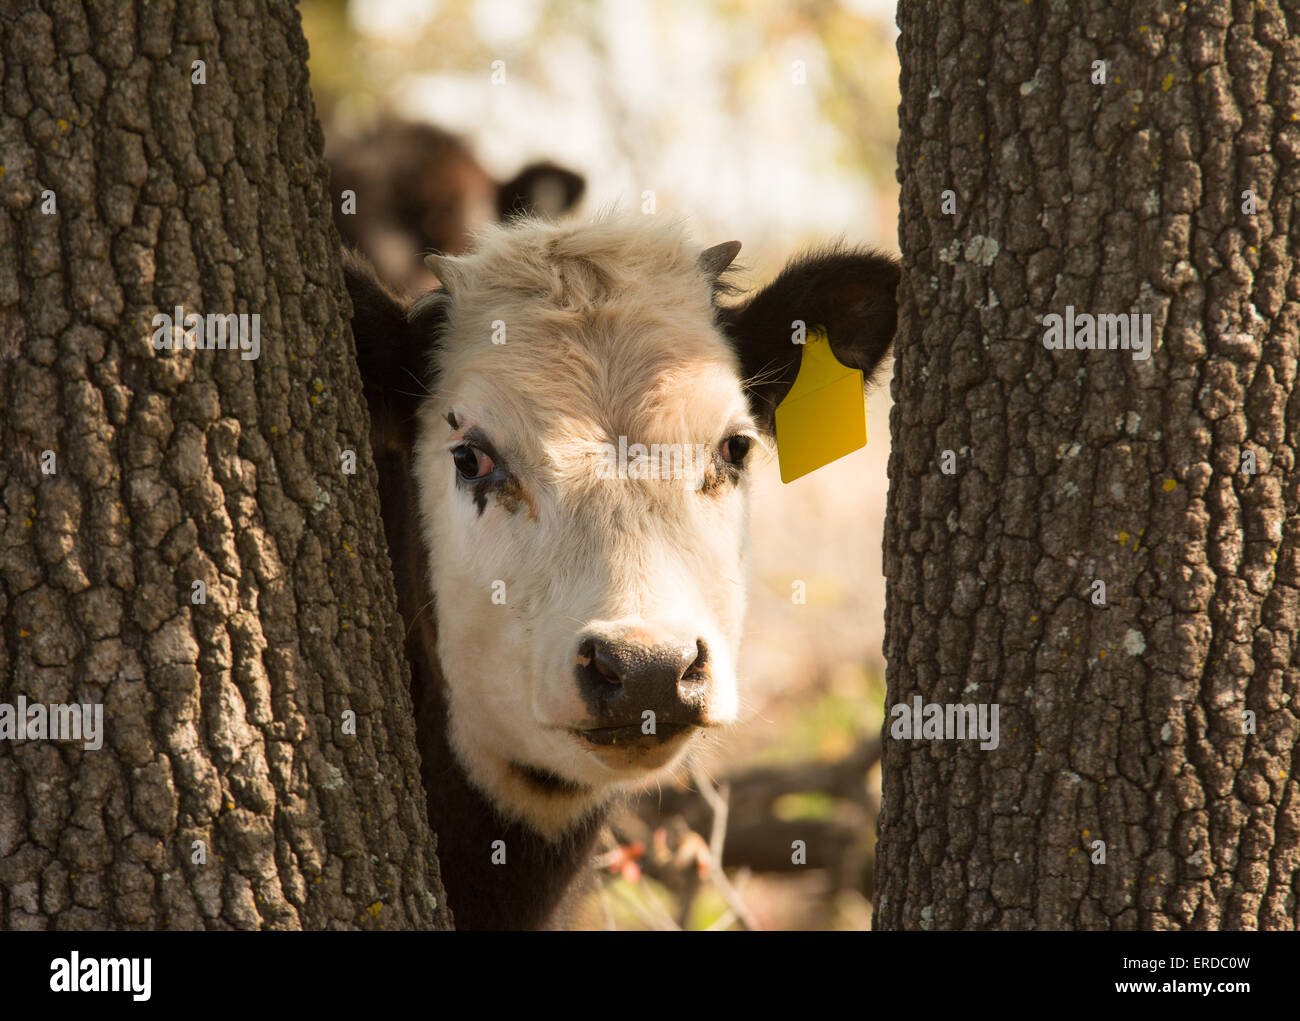 Young white faced steer peeking curiously through tree trunks at the viewer Stock Photo